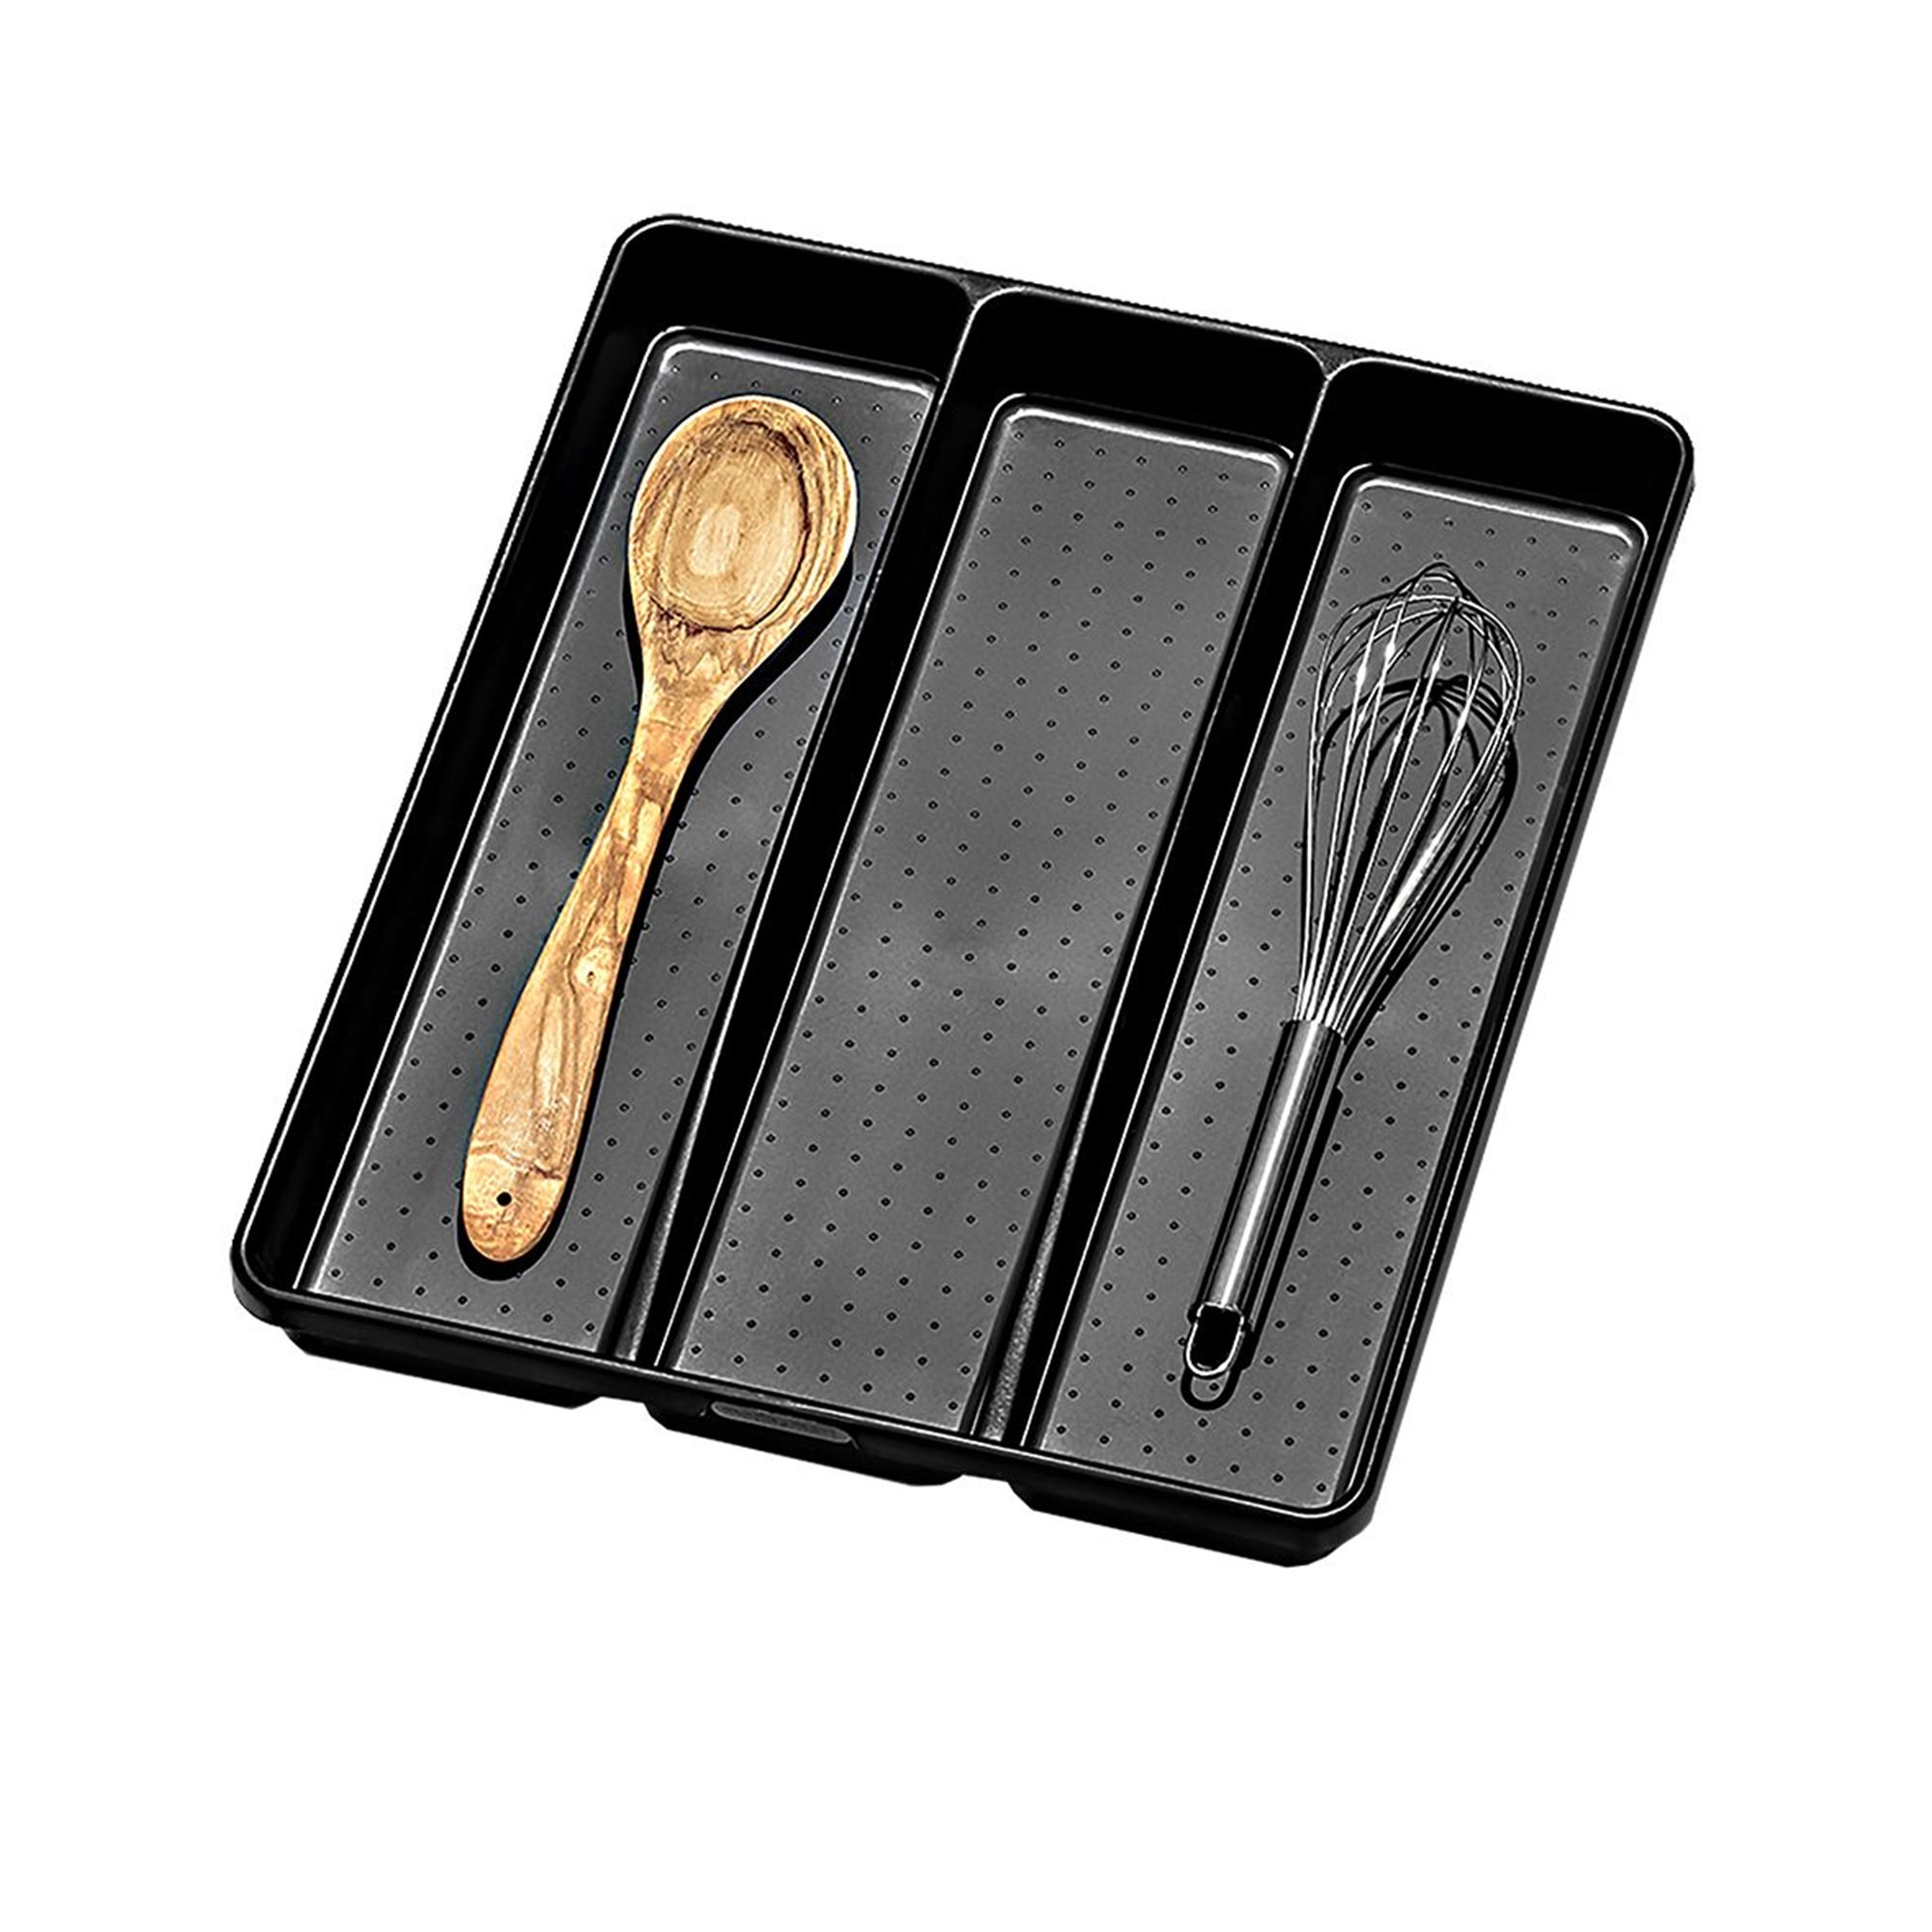 Madesmart Large Utensil Tray 3 Compartment Carbon Image 1